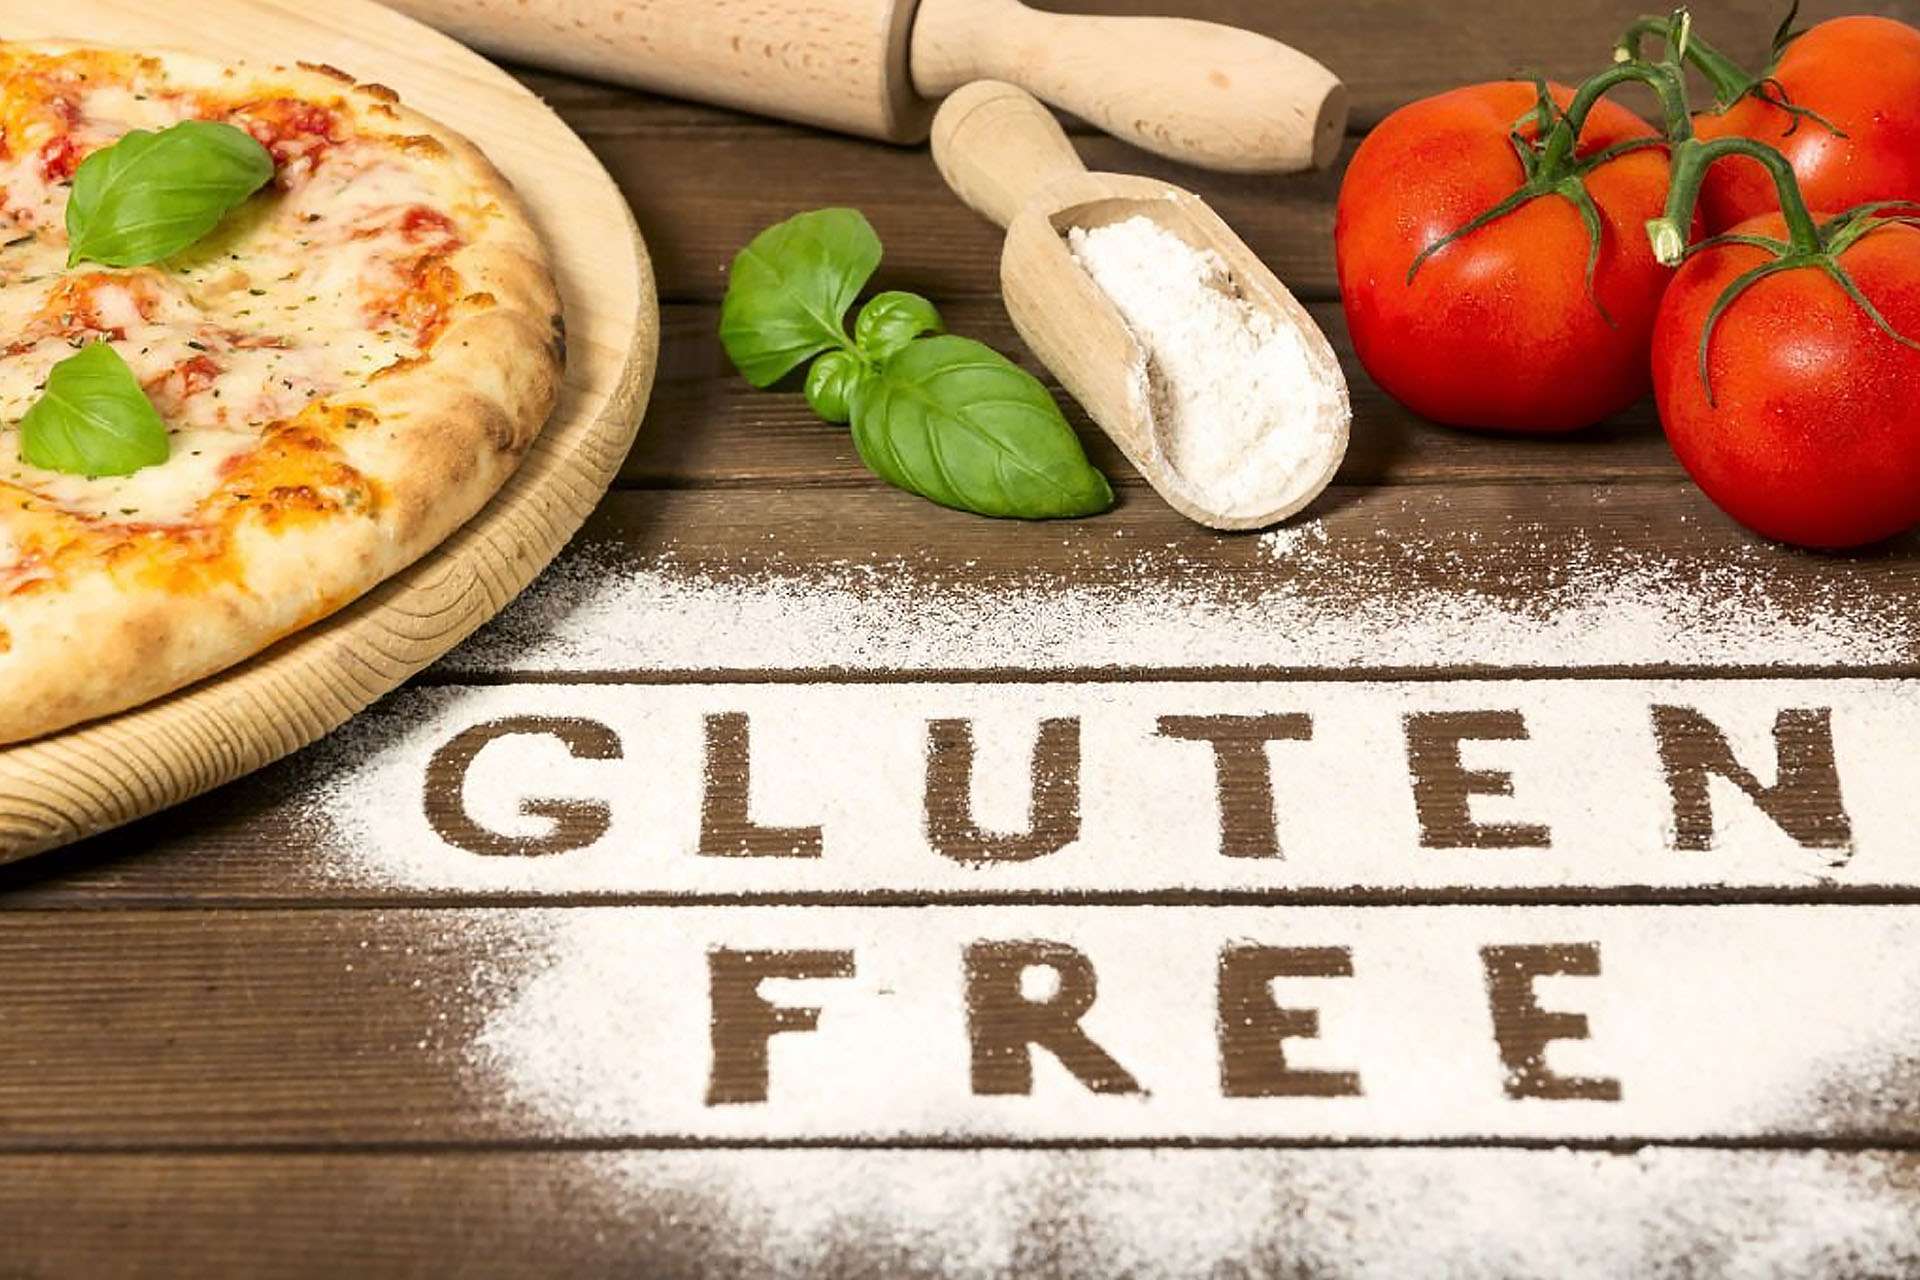 There is a widespread idea that gluten-free foods are healthier, but this is not correct